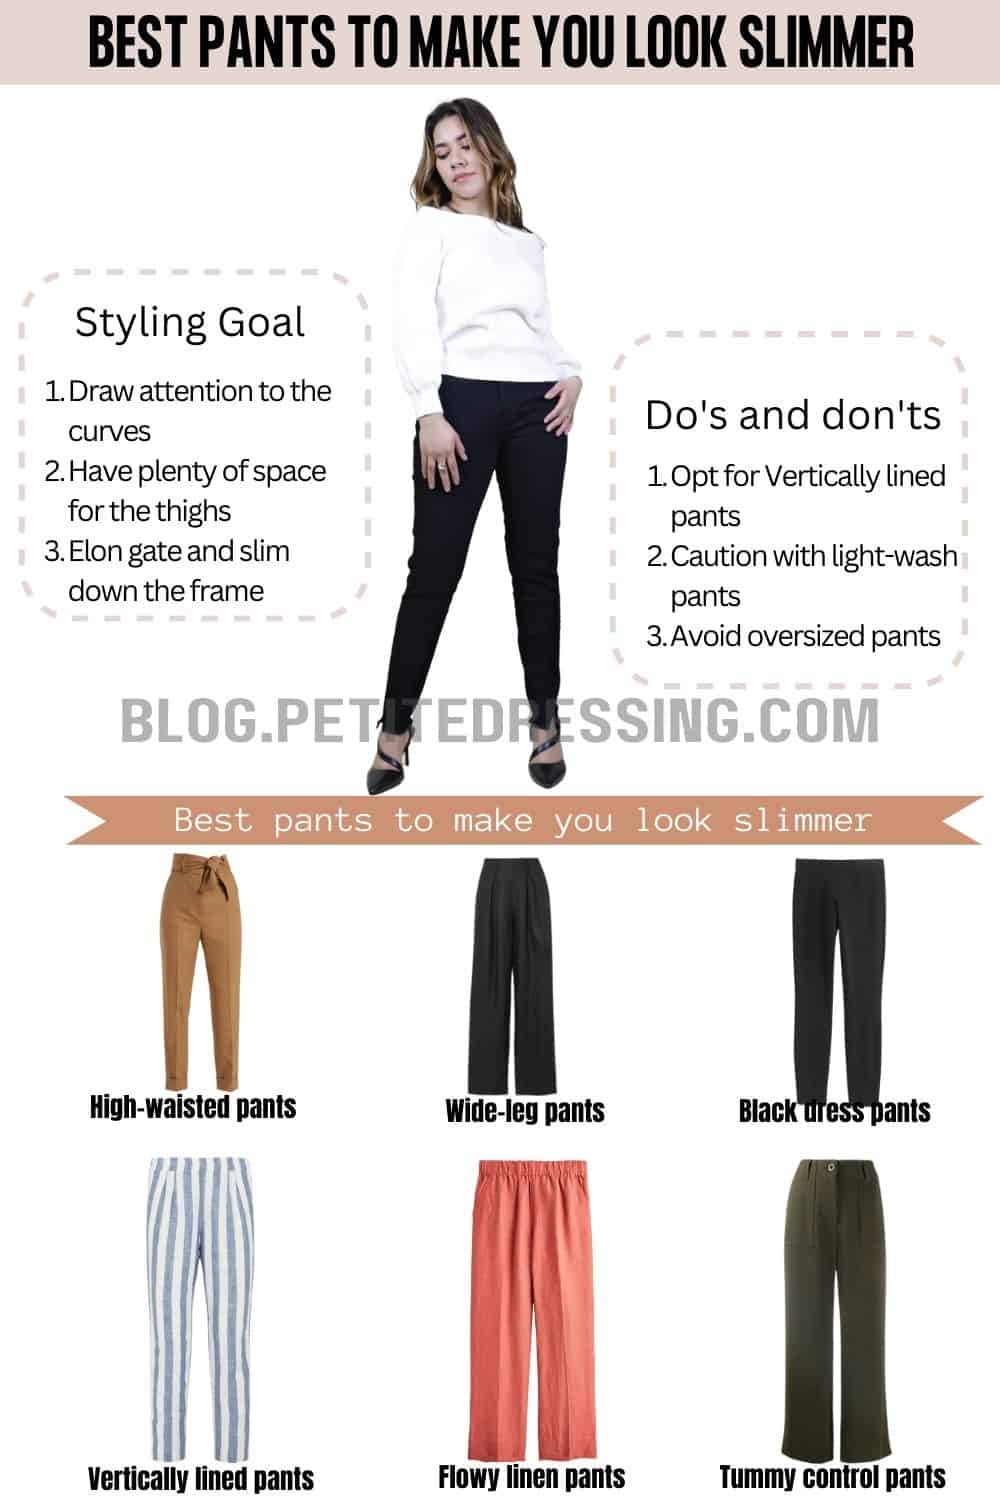 10 Types of Pants That Make You Look Slimmer